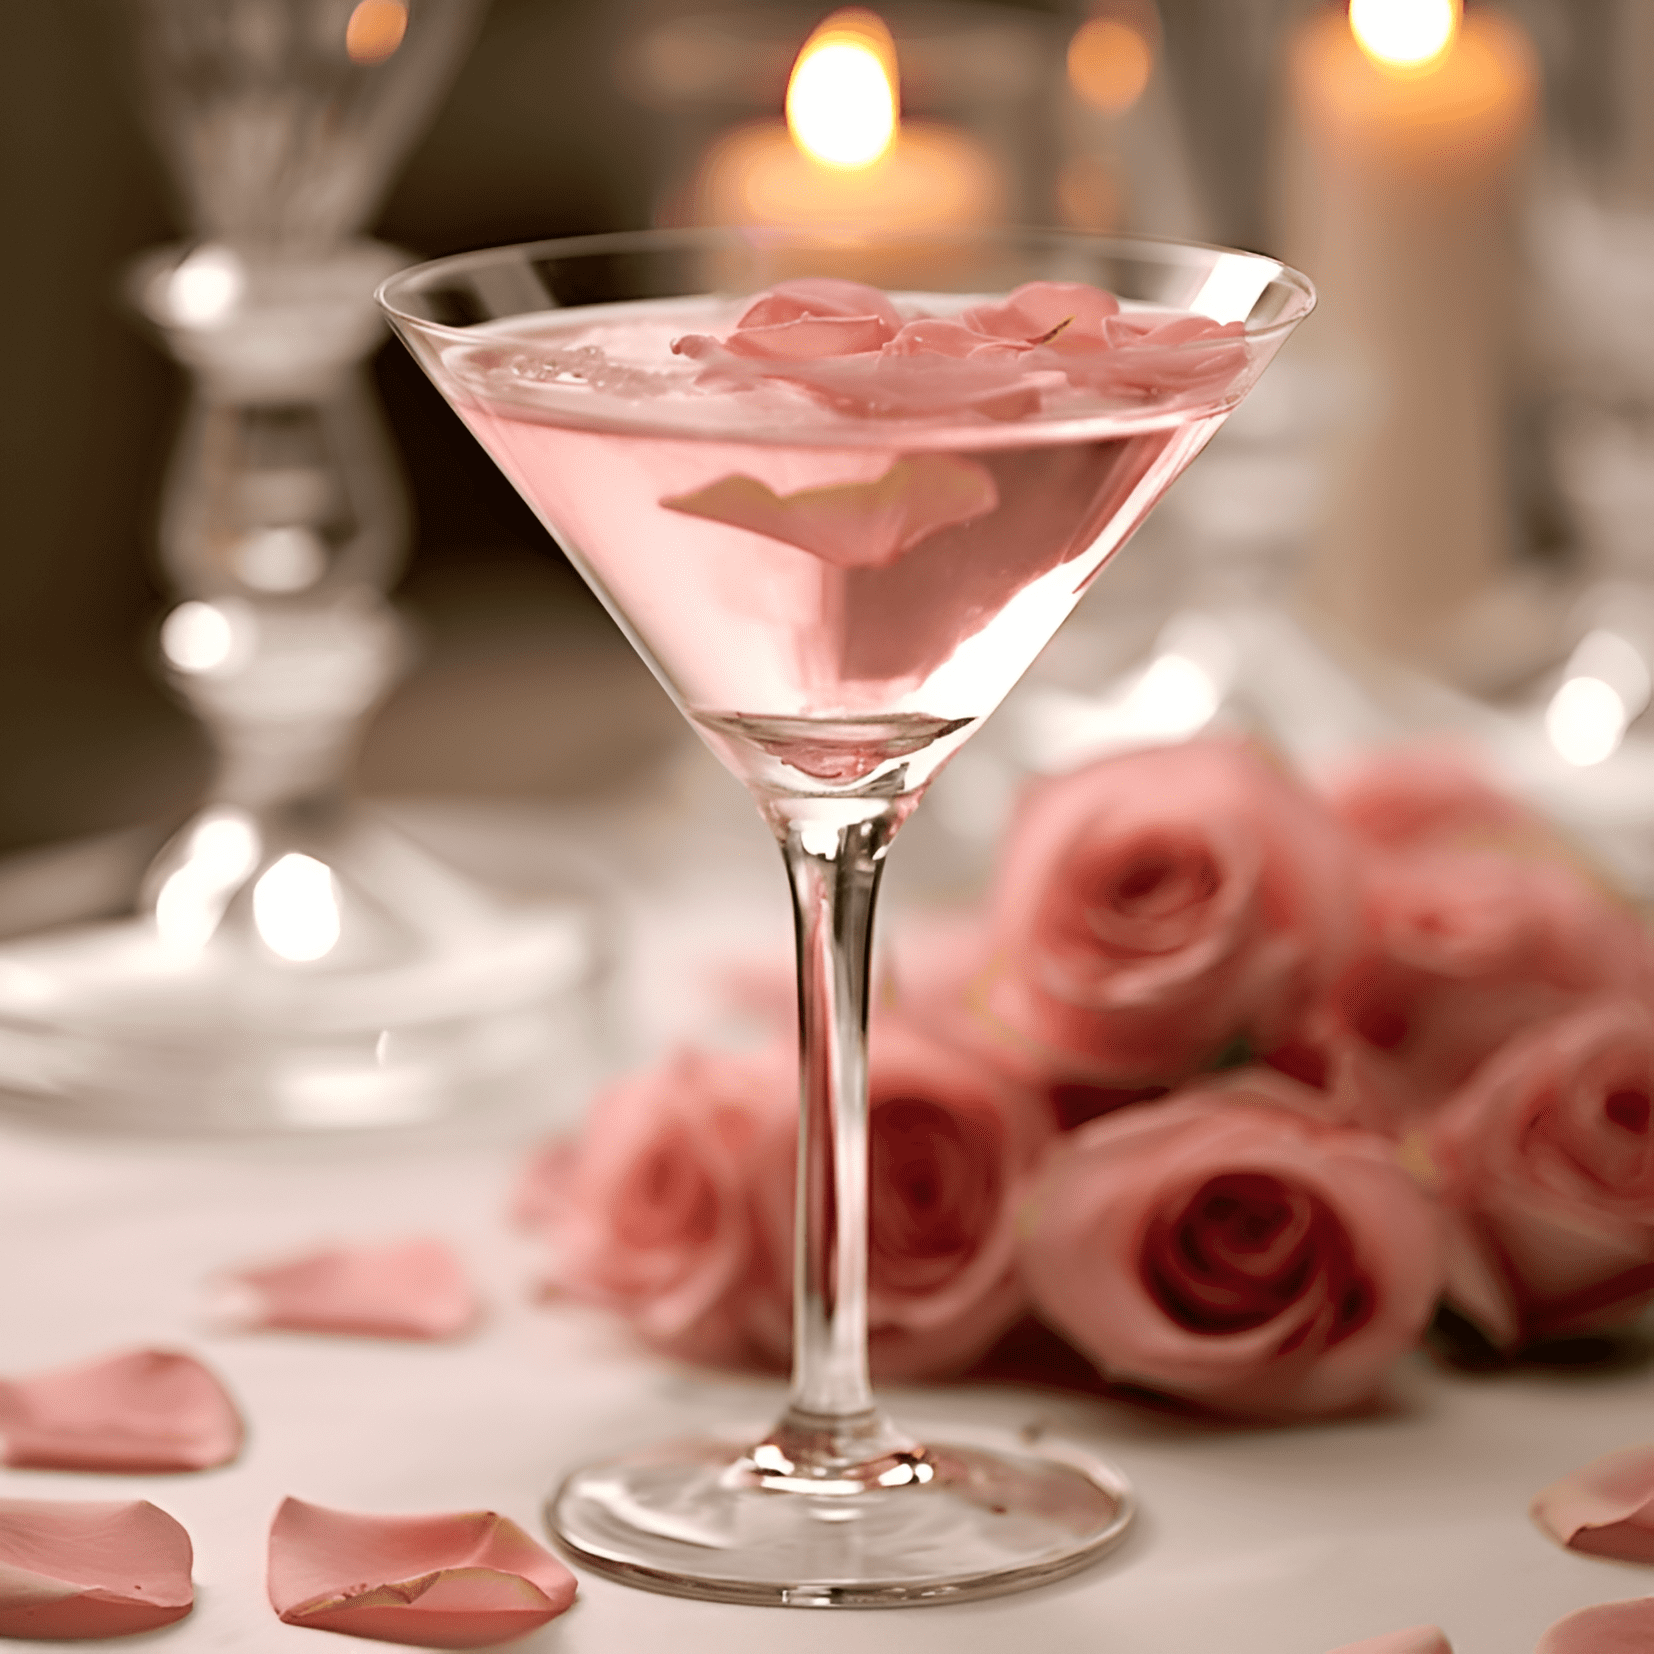 The Rose cocktail has a delicate and floral taste, with a hint of sweetness from the raspberry syrup. It is light and refreshing, with a subtle complexity from the combination of vermouth and cherry brandy. The finish is crisp and clean, leaving a pleasant aftertaste.